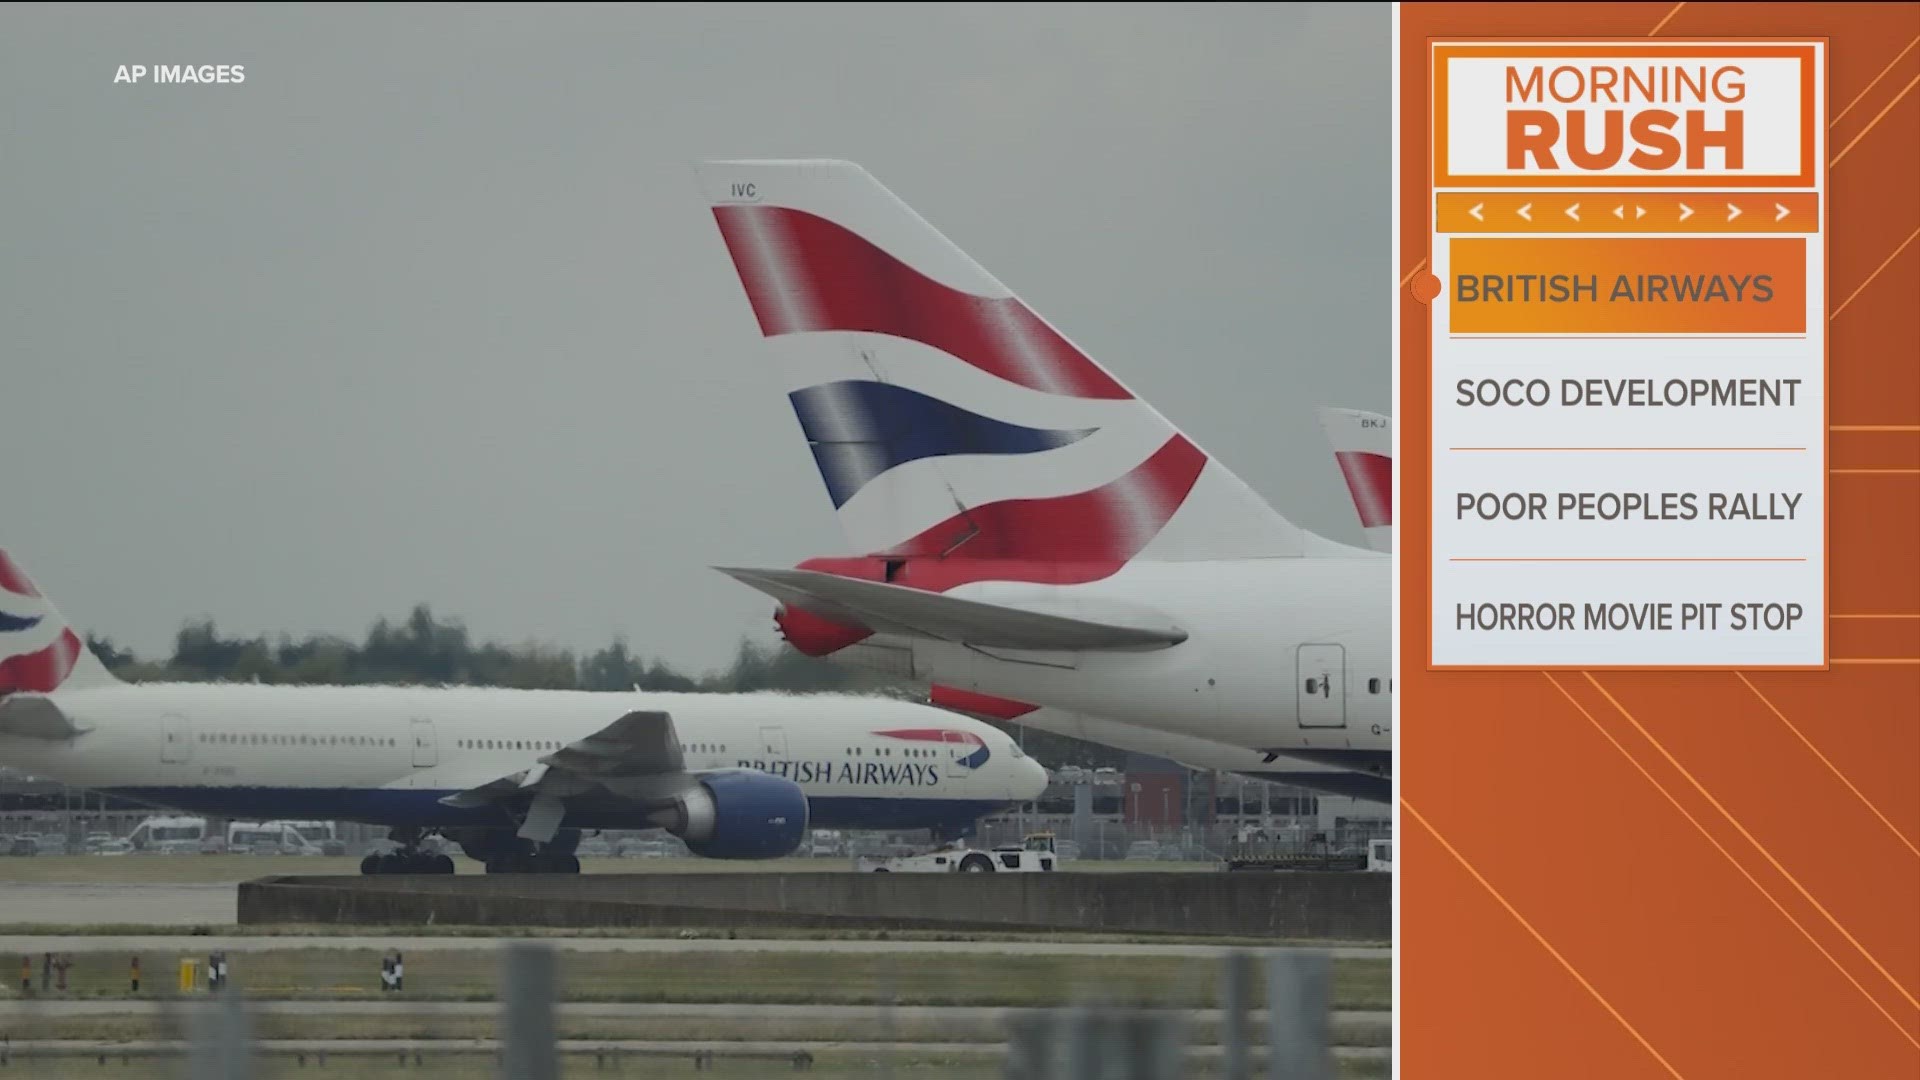 British Airways has been flying from AIBA since 2014.